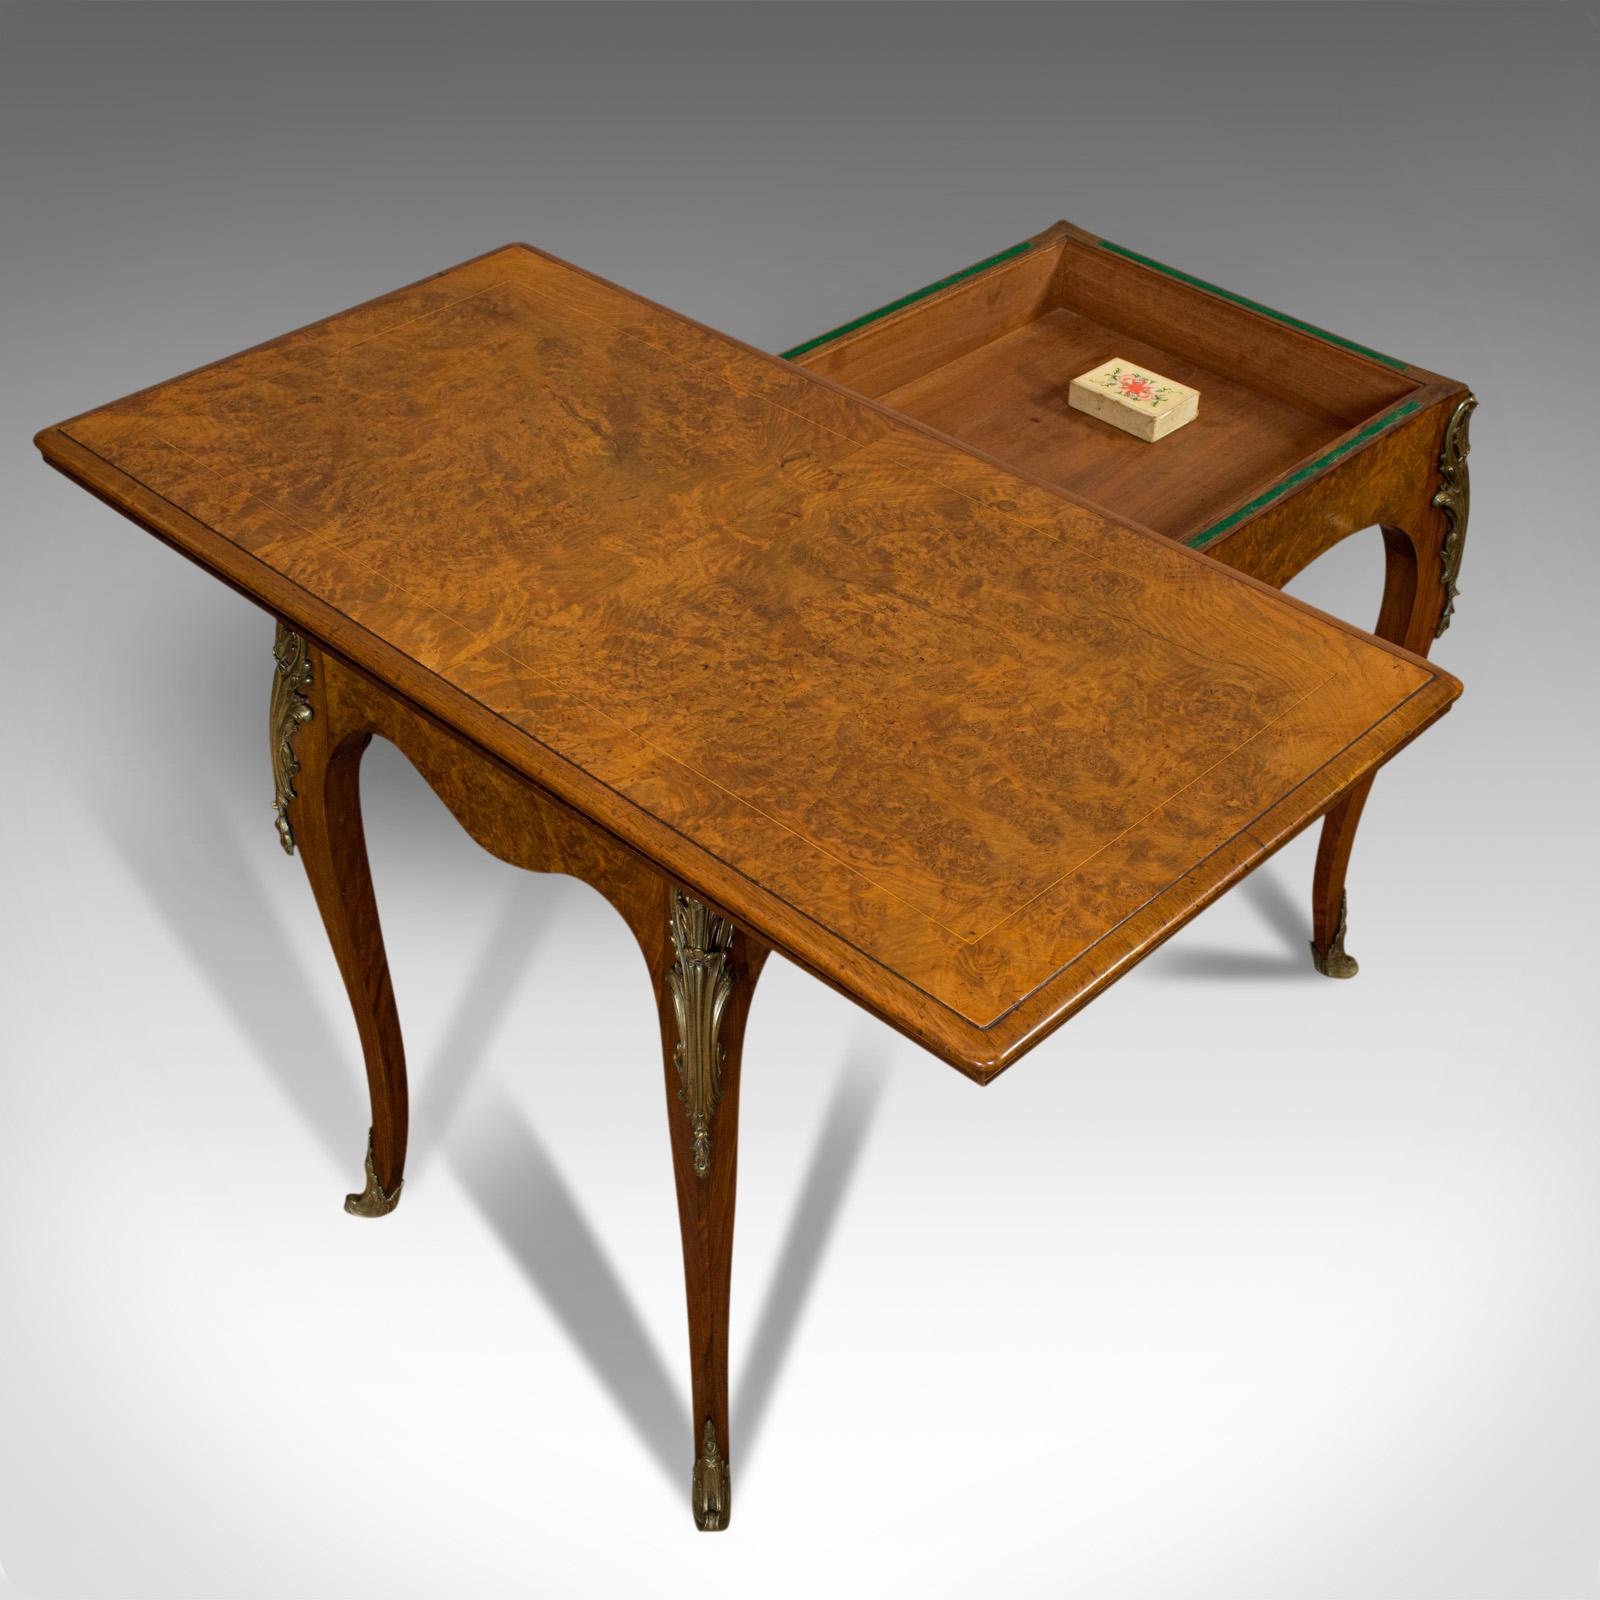 Antique Card Table, French, Burr Walnut, Fold over, Games, Victorian, circa 1870 For Sale 1